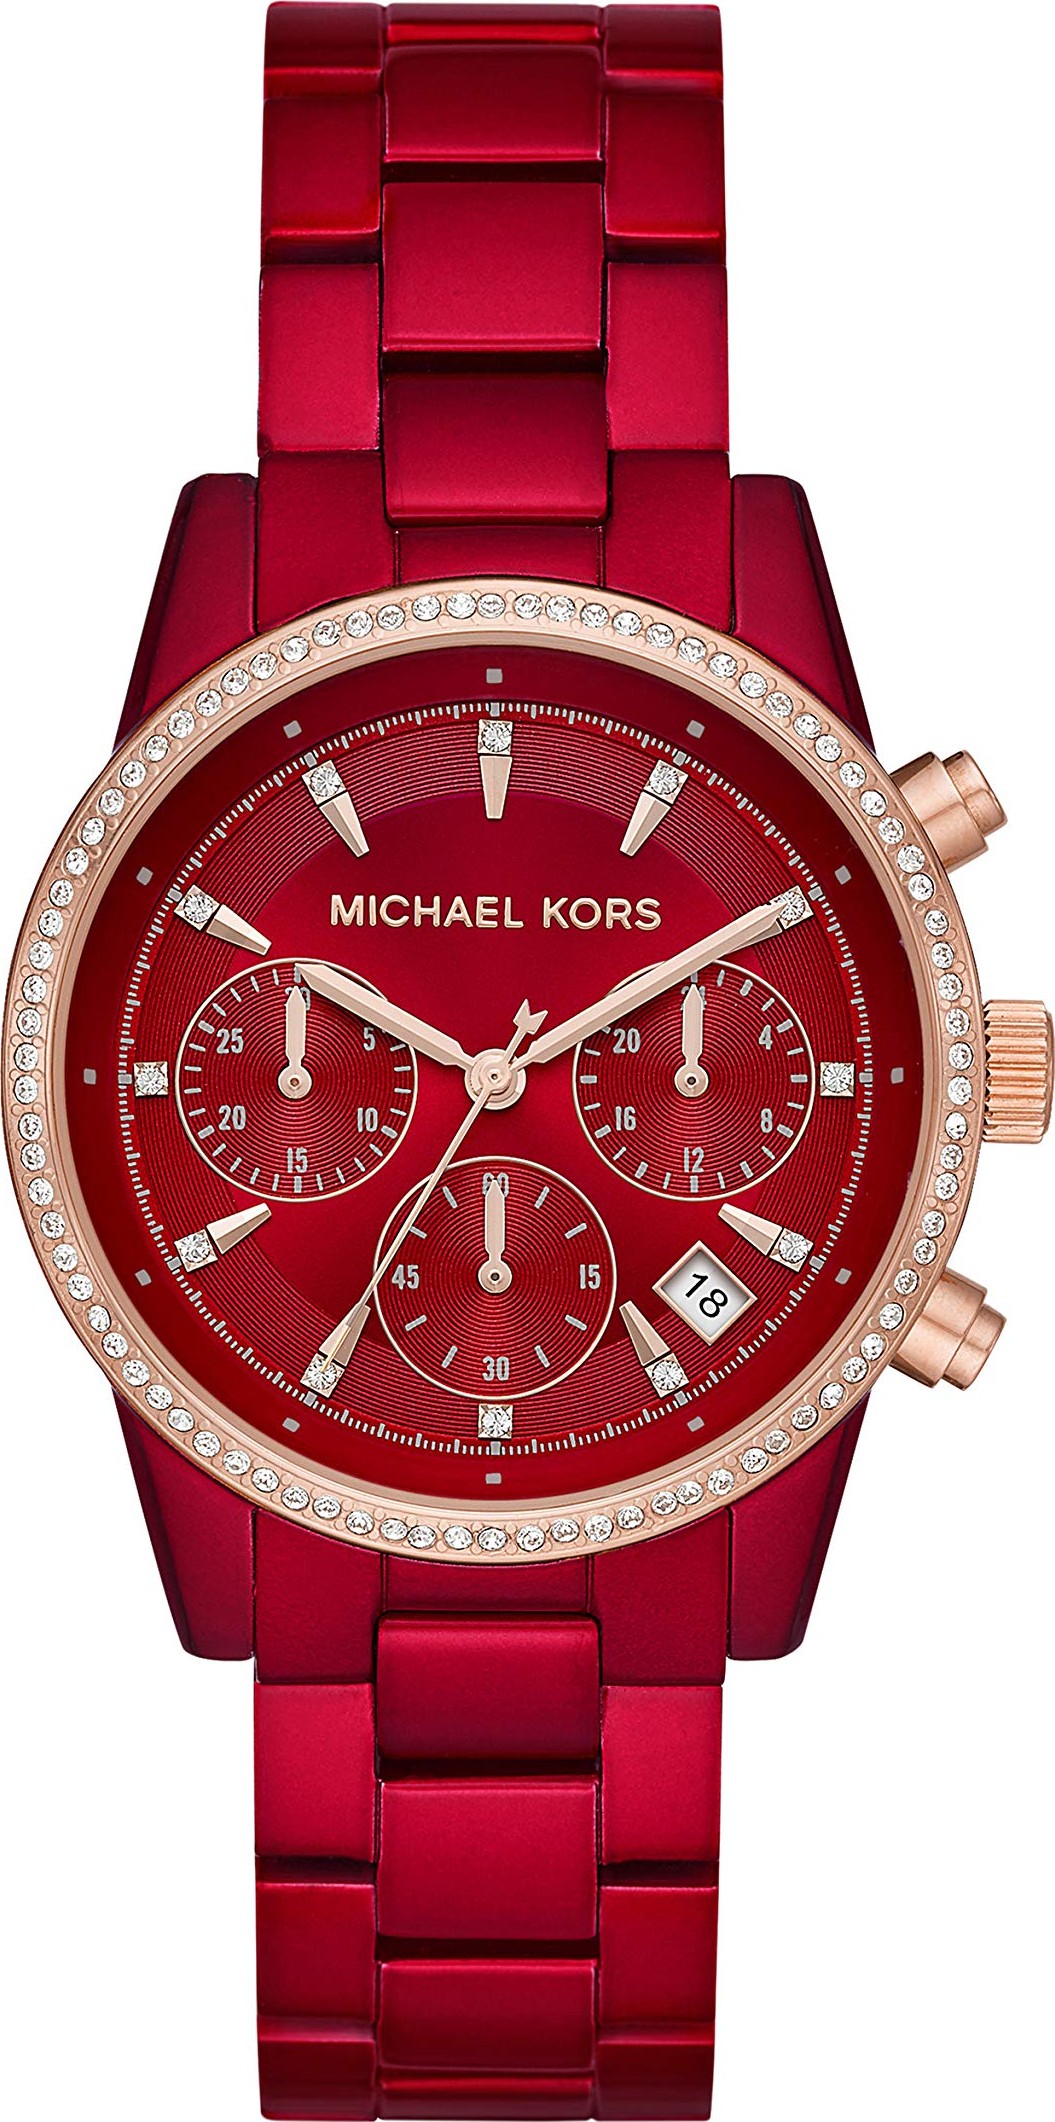 Michael Kors taps your Instagram feed to beautify your smartwatch  Engadget